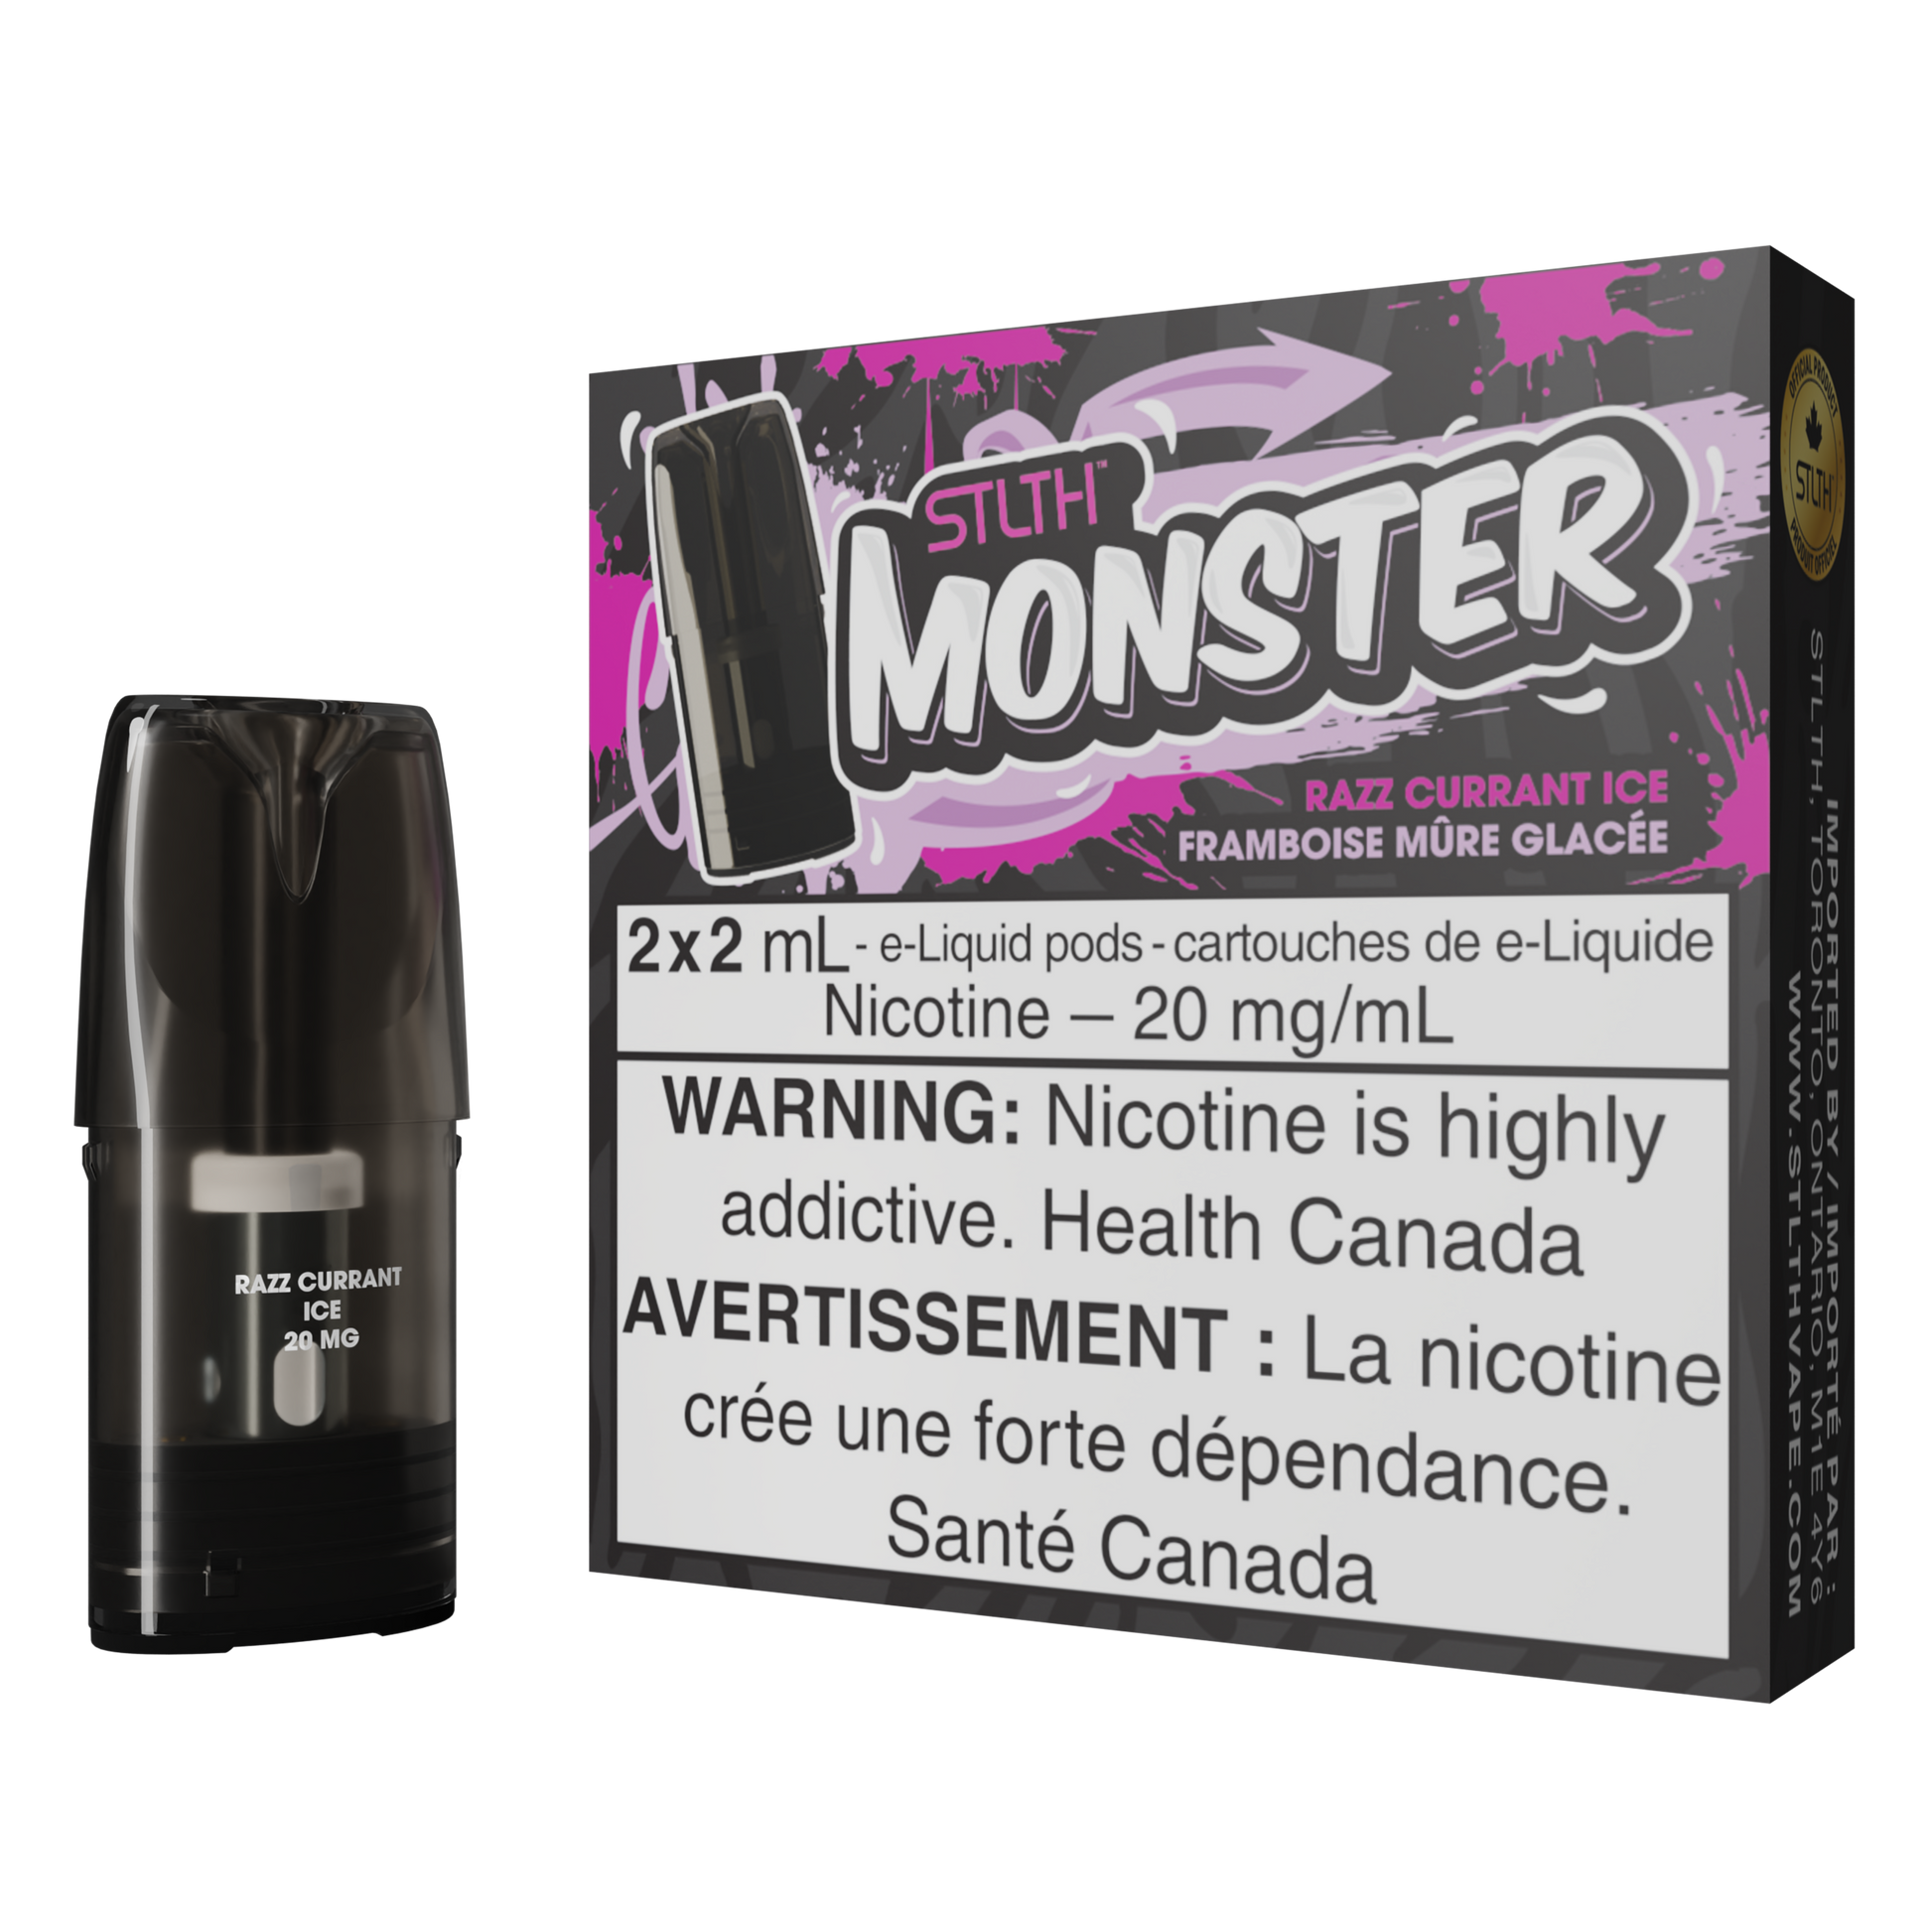 STLTH MONSTER Pod Pack - Razz Currant Ice